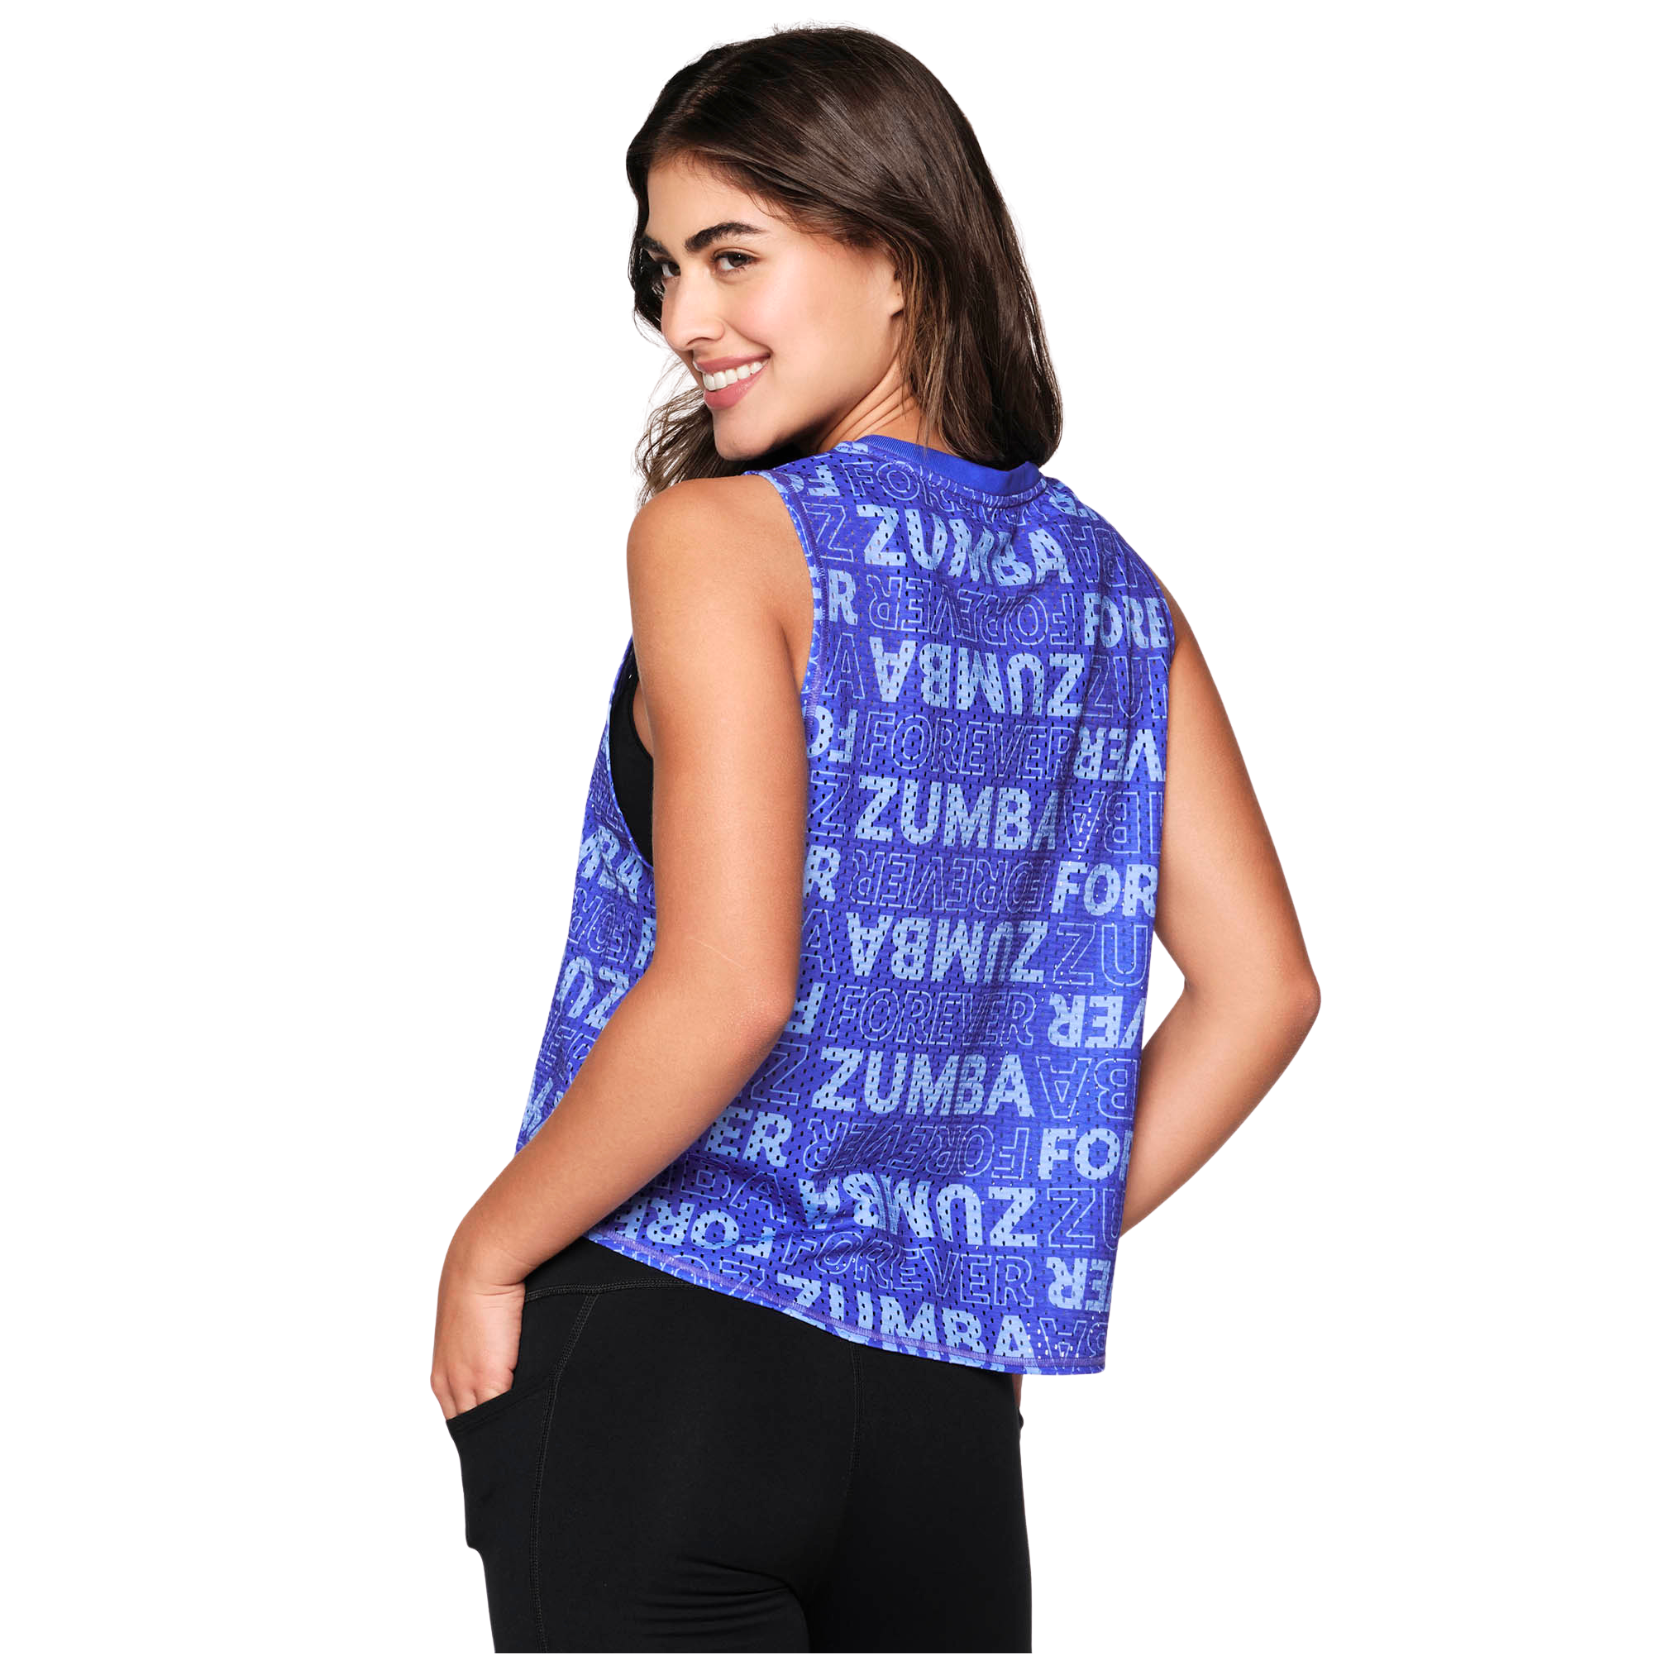 Zumba Forever Mesh Muscle Tank (Special Order)